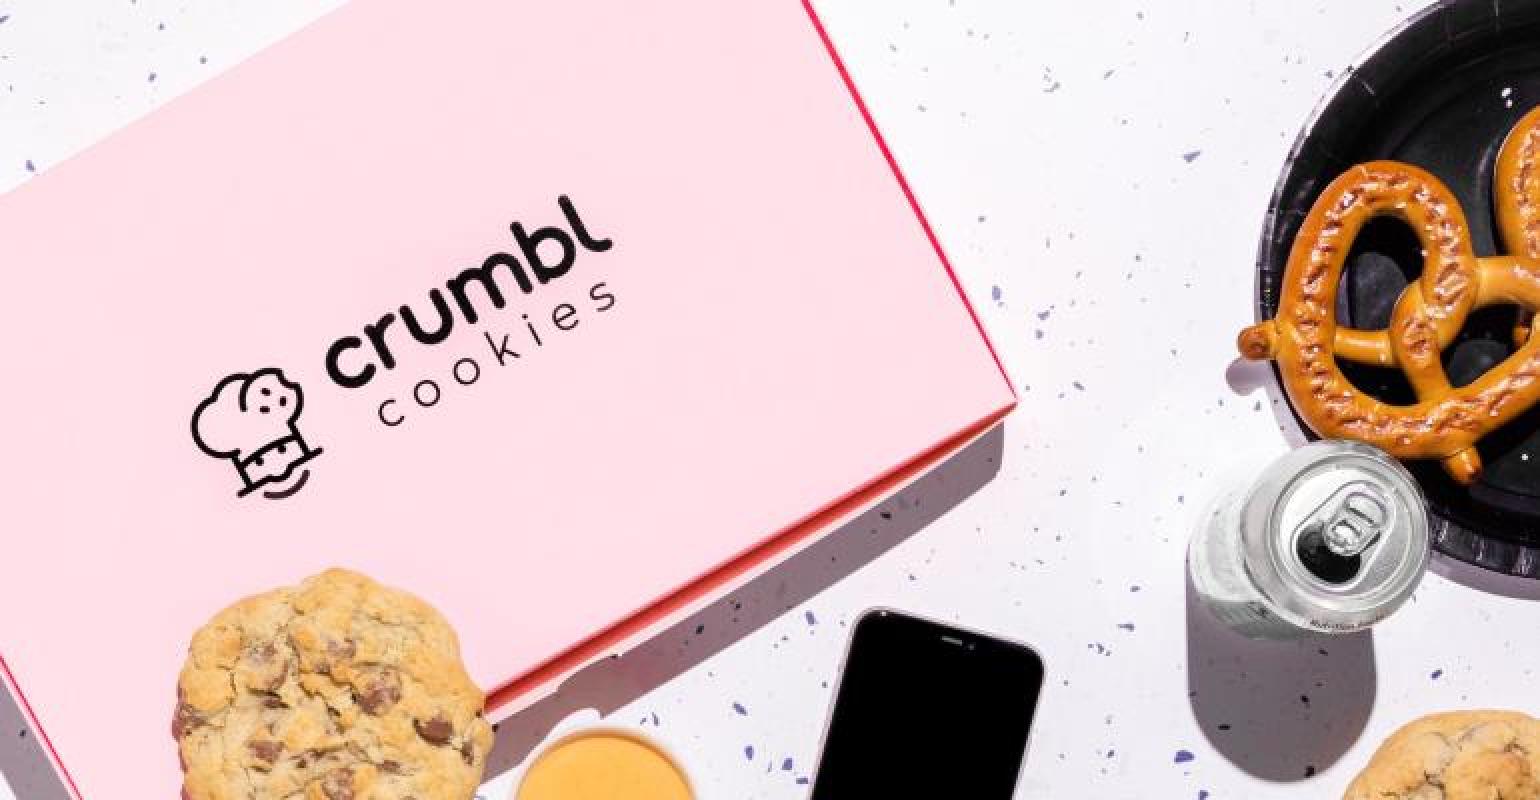 Crumbl cookies: Way batter than expected